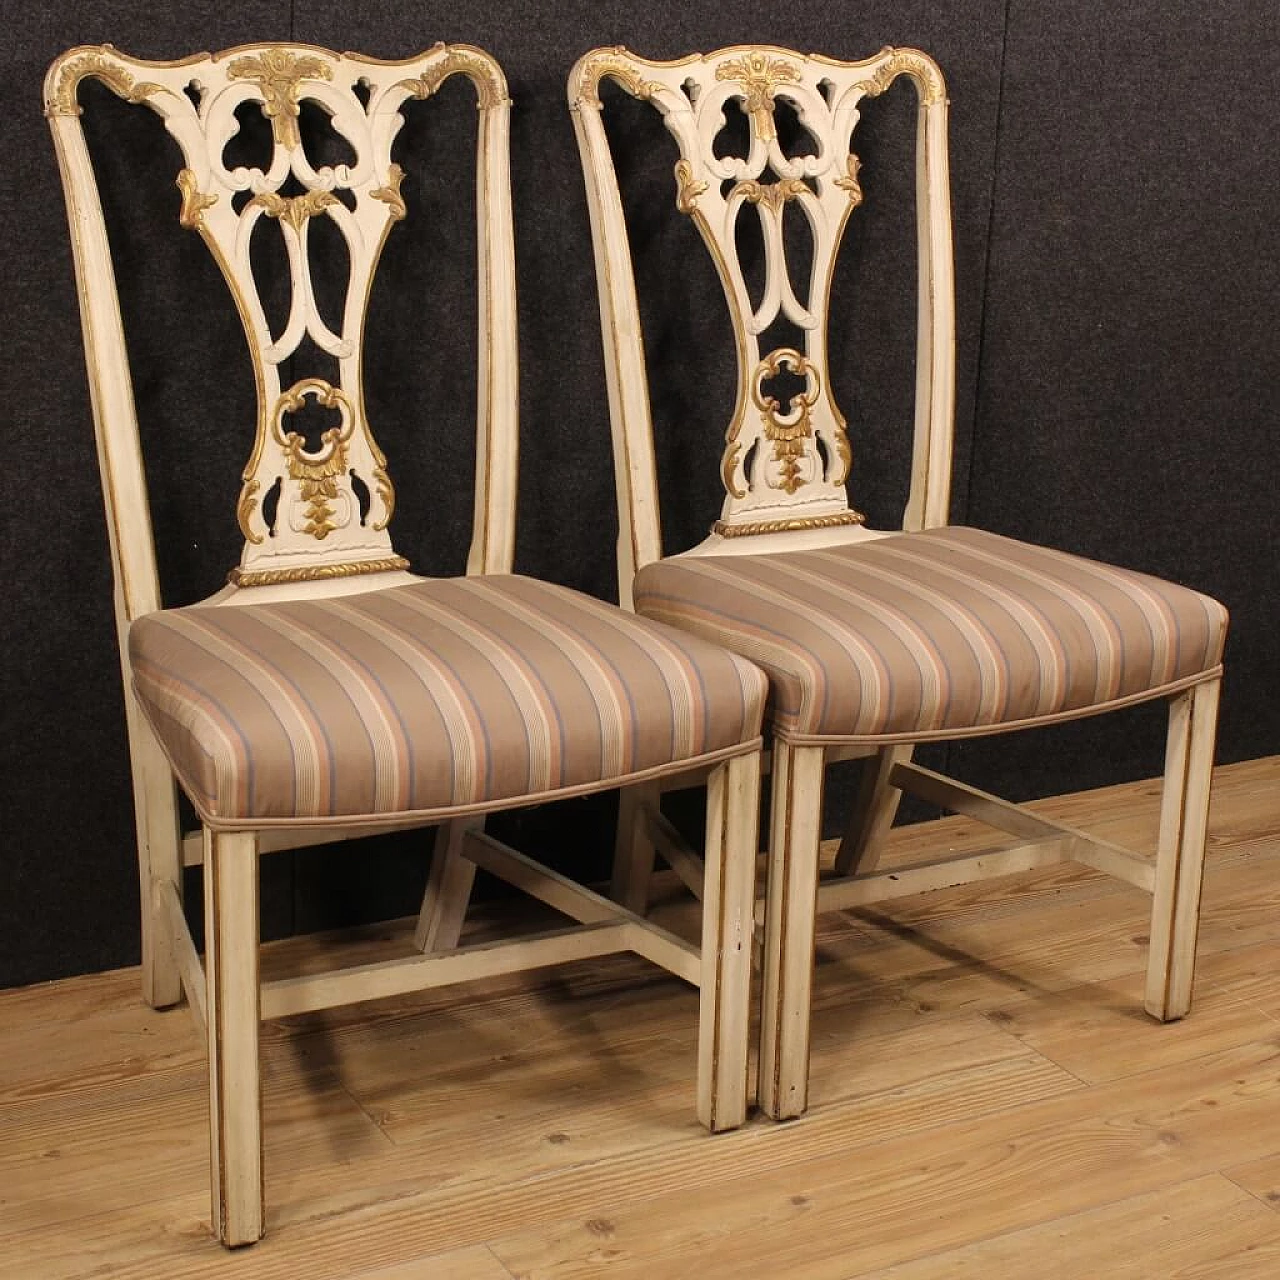 Pair of lacquered and gilded wood padded chairs 1